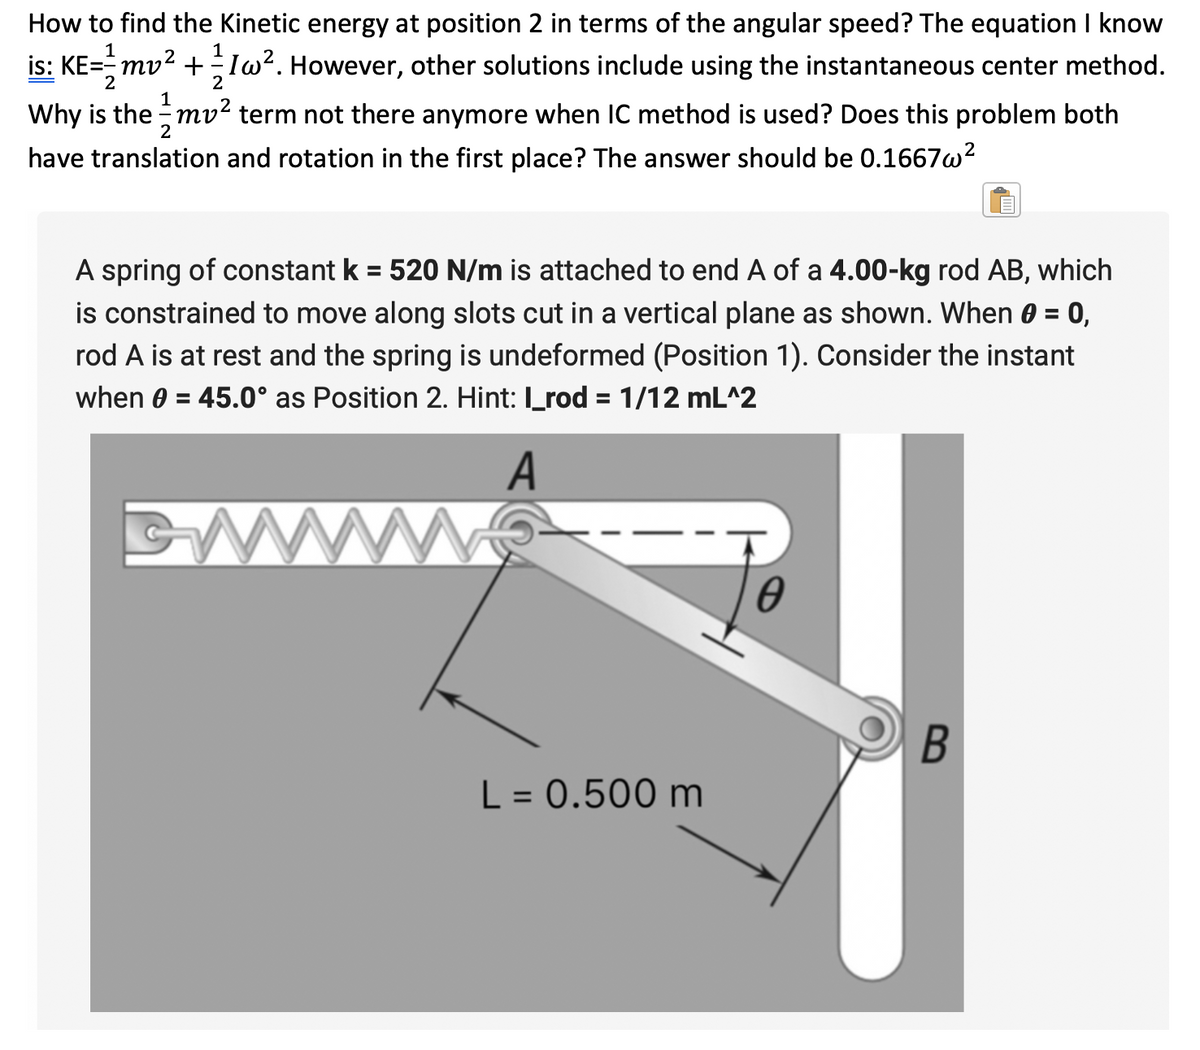 How to find the Kinetic energy at position 2 in terms of the angular speed? The equation I know
is: KE=mv² +1w². However, other solutions include using the instantaneous center method.
2
1
Why is the mv² term not there anymore when IC method is used? Does this problem both
have translation and rotation in the first place? The answer should be 0.1667w²
A spring of constant k = 520 N/m is attached to end A of a 4.00-kg rod AB, which
is constrained to move along slots cut in a vertical plane as shown. When 0 = 0,
rod A is at rest and the spring is undeformed (Position 1). Consider the instant
when 0 = 45.0° as Position 2. Hint: I_rod = 1/12 mL^2
A
L = 0.500 m
0
B